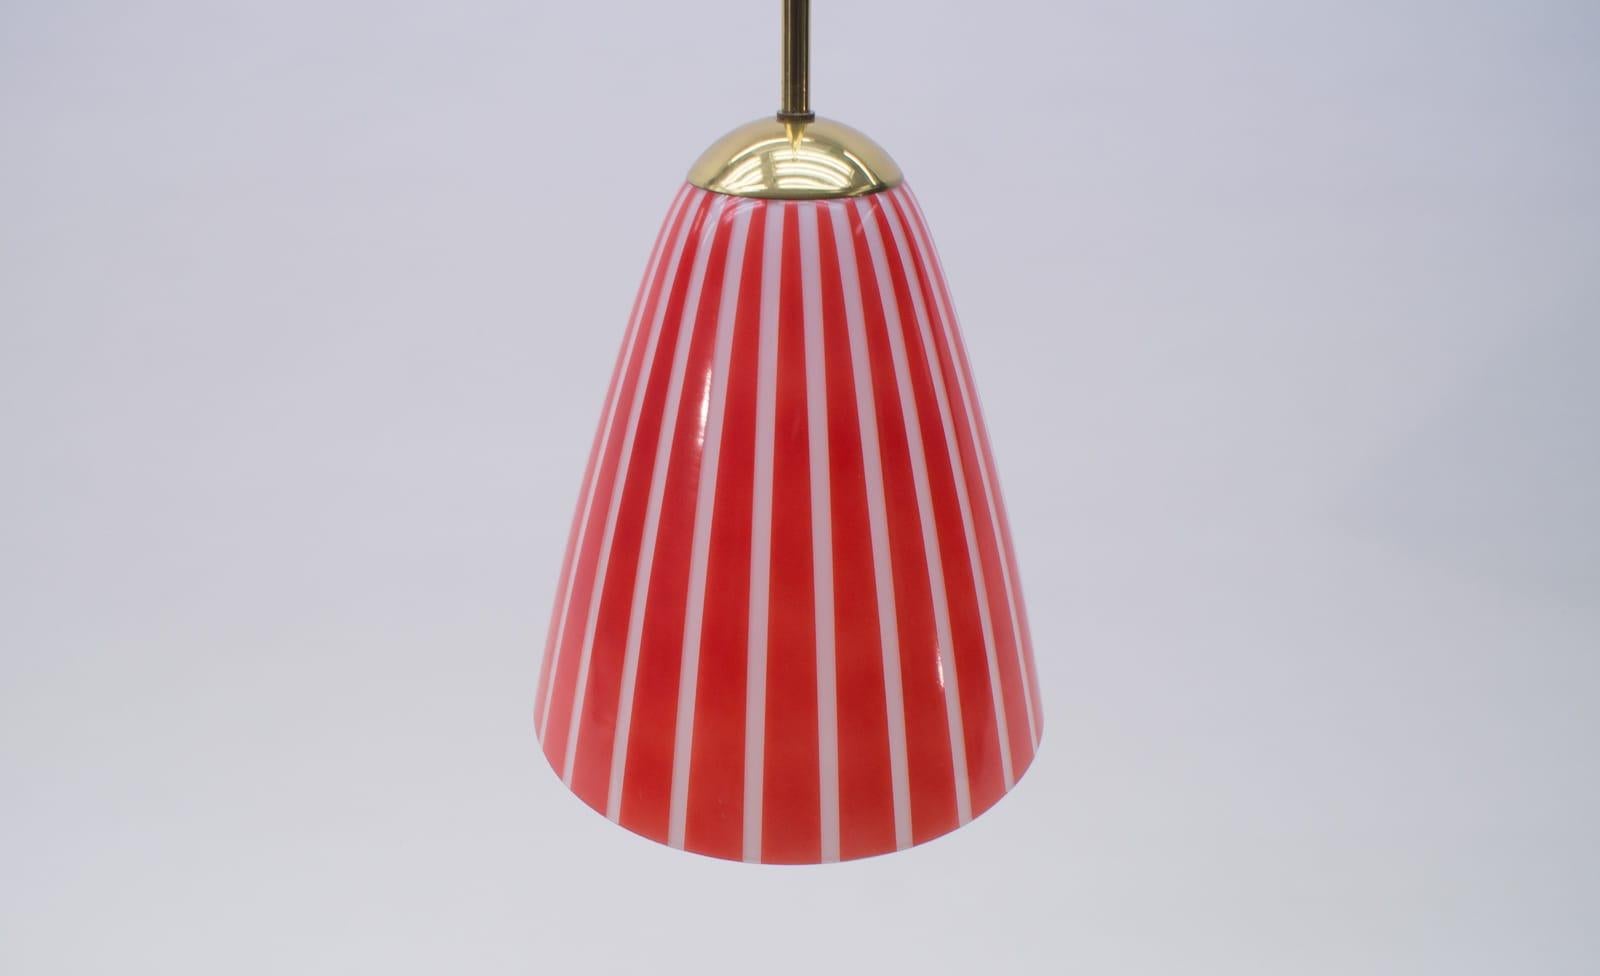 Elegant Mid-Century Modern Pendant Lamp Made of Brass and Glass, 1950s Austria For Sale 2